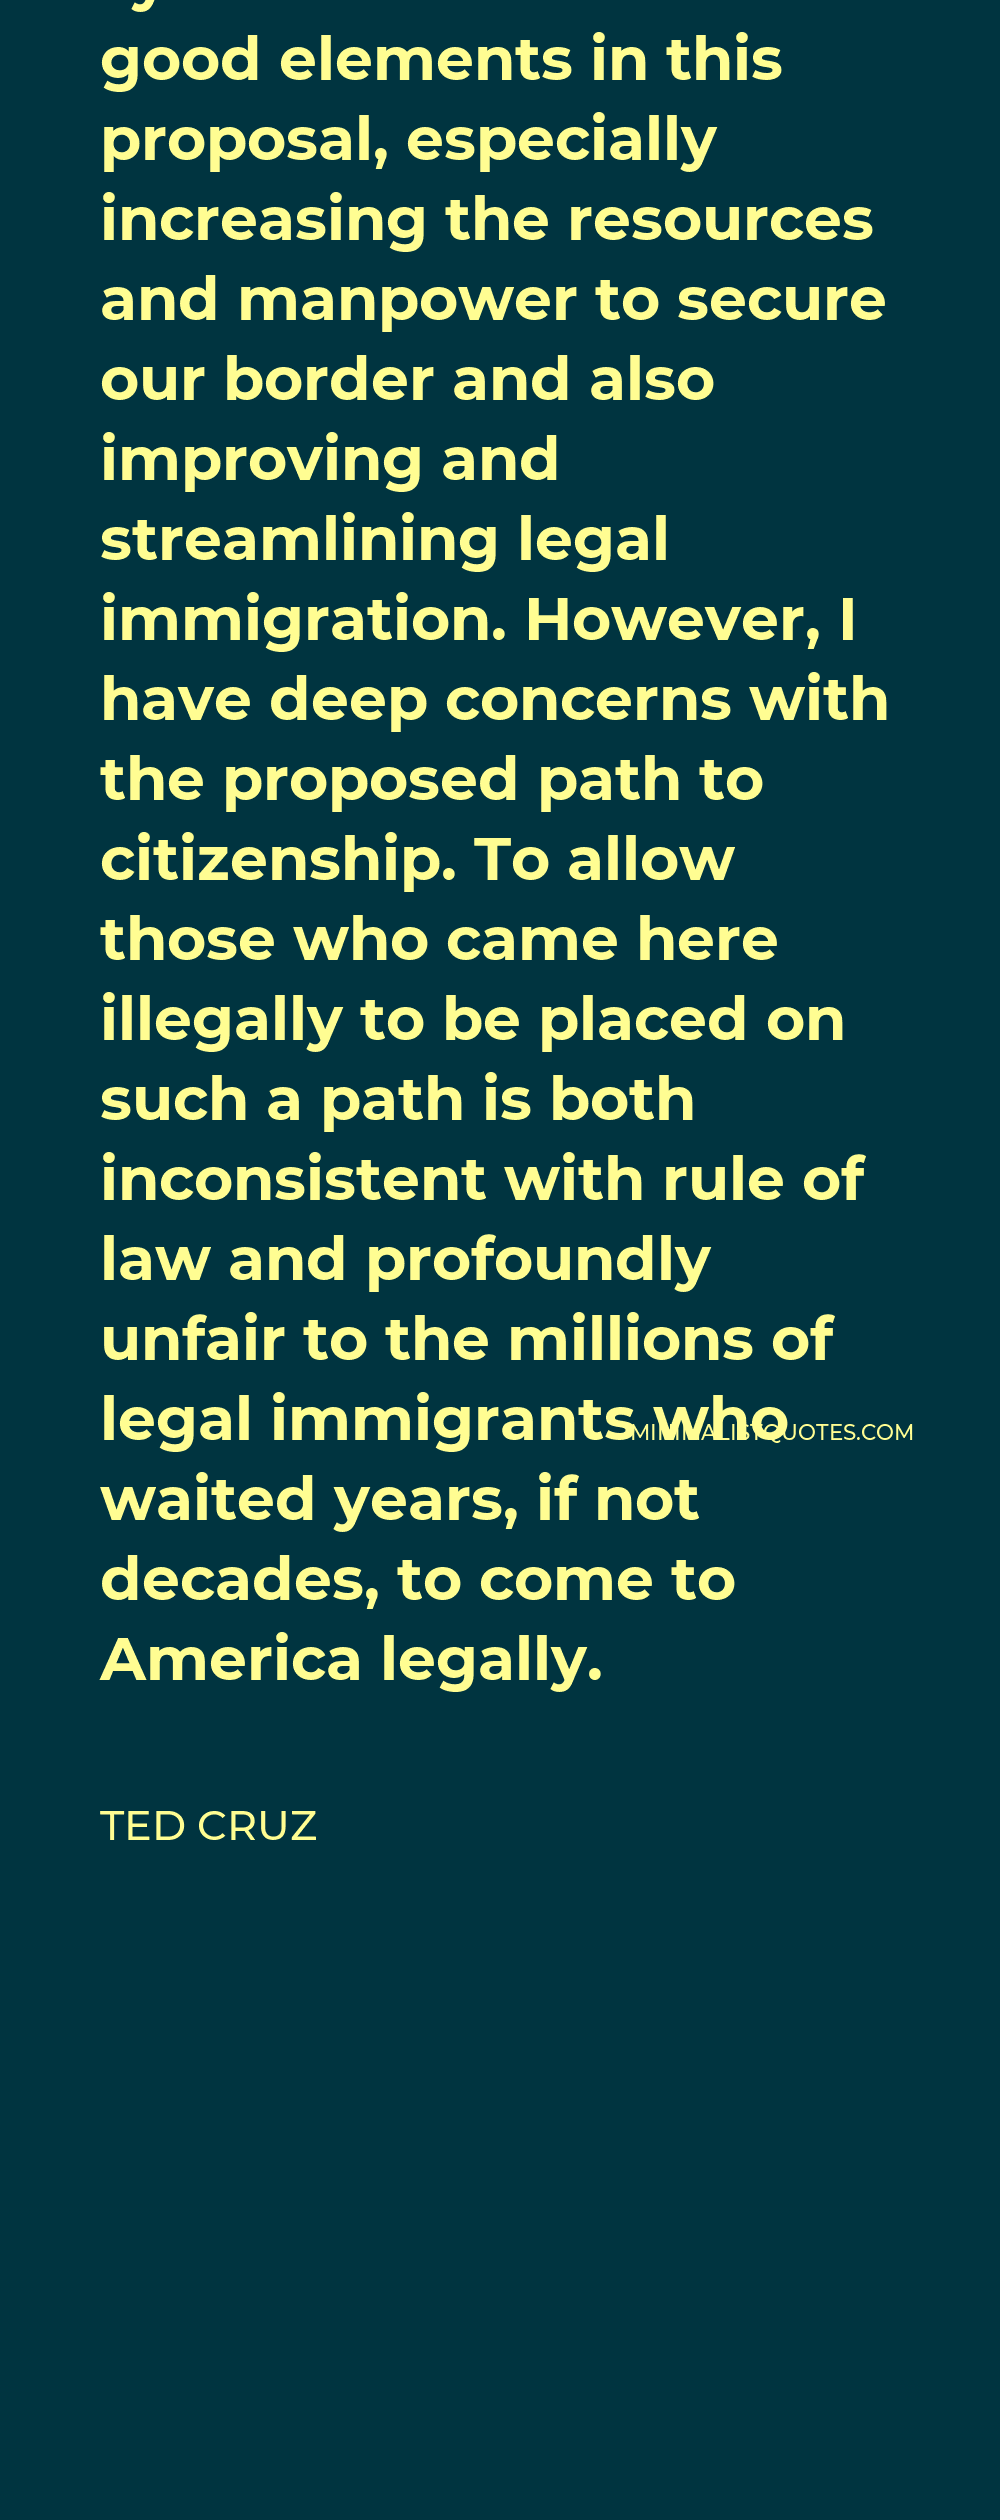 Ted Cruz Quote - I appreciate the good work that senators in both parties have put into trying to fix our broken immigration system. There are some good elements in this proposal, especially increasing the resources and manpower to secure our border and also improving and streamlining legal immigration. However, I have deep concerns with the proposed path to citizenship. To allow those who came here illegally to be placed on such a path is both inconsistent with rule of law and profoundly unfair to the millions of legal immigrants who waited years, if not decades, to come to America legally.